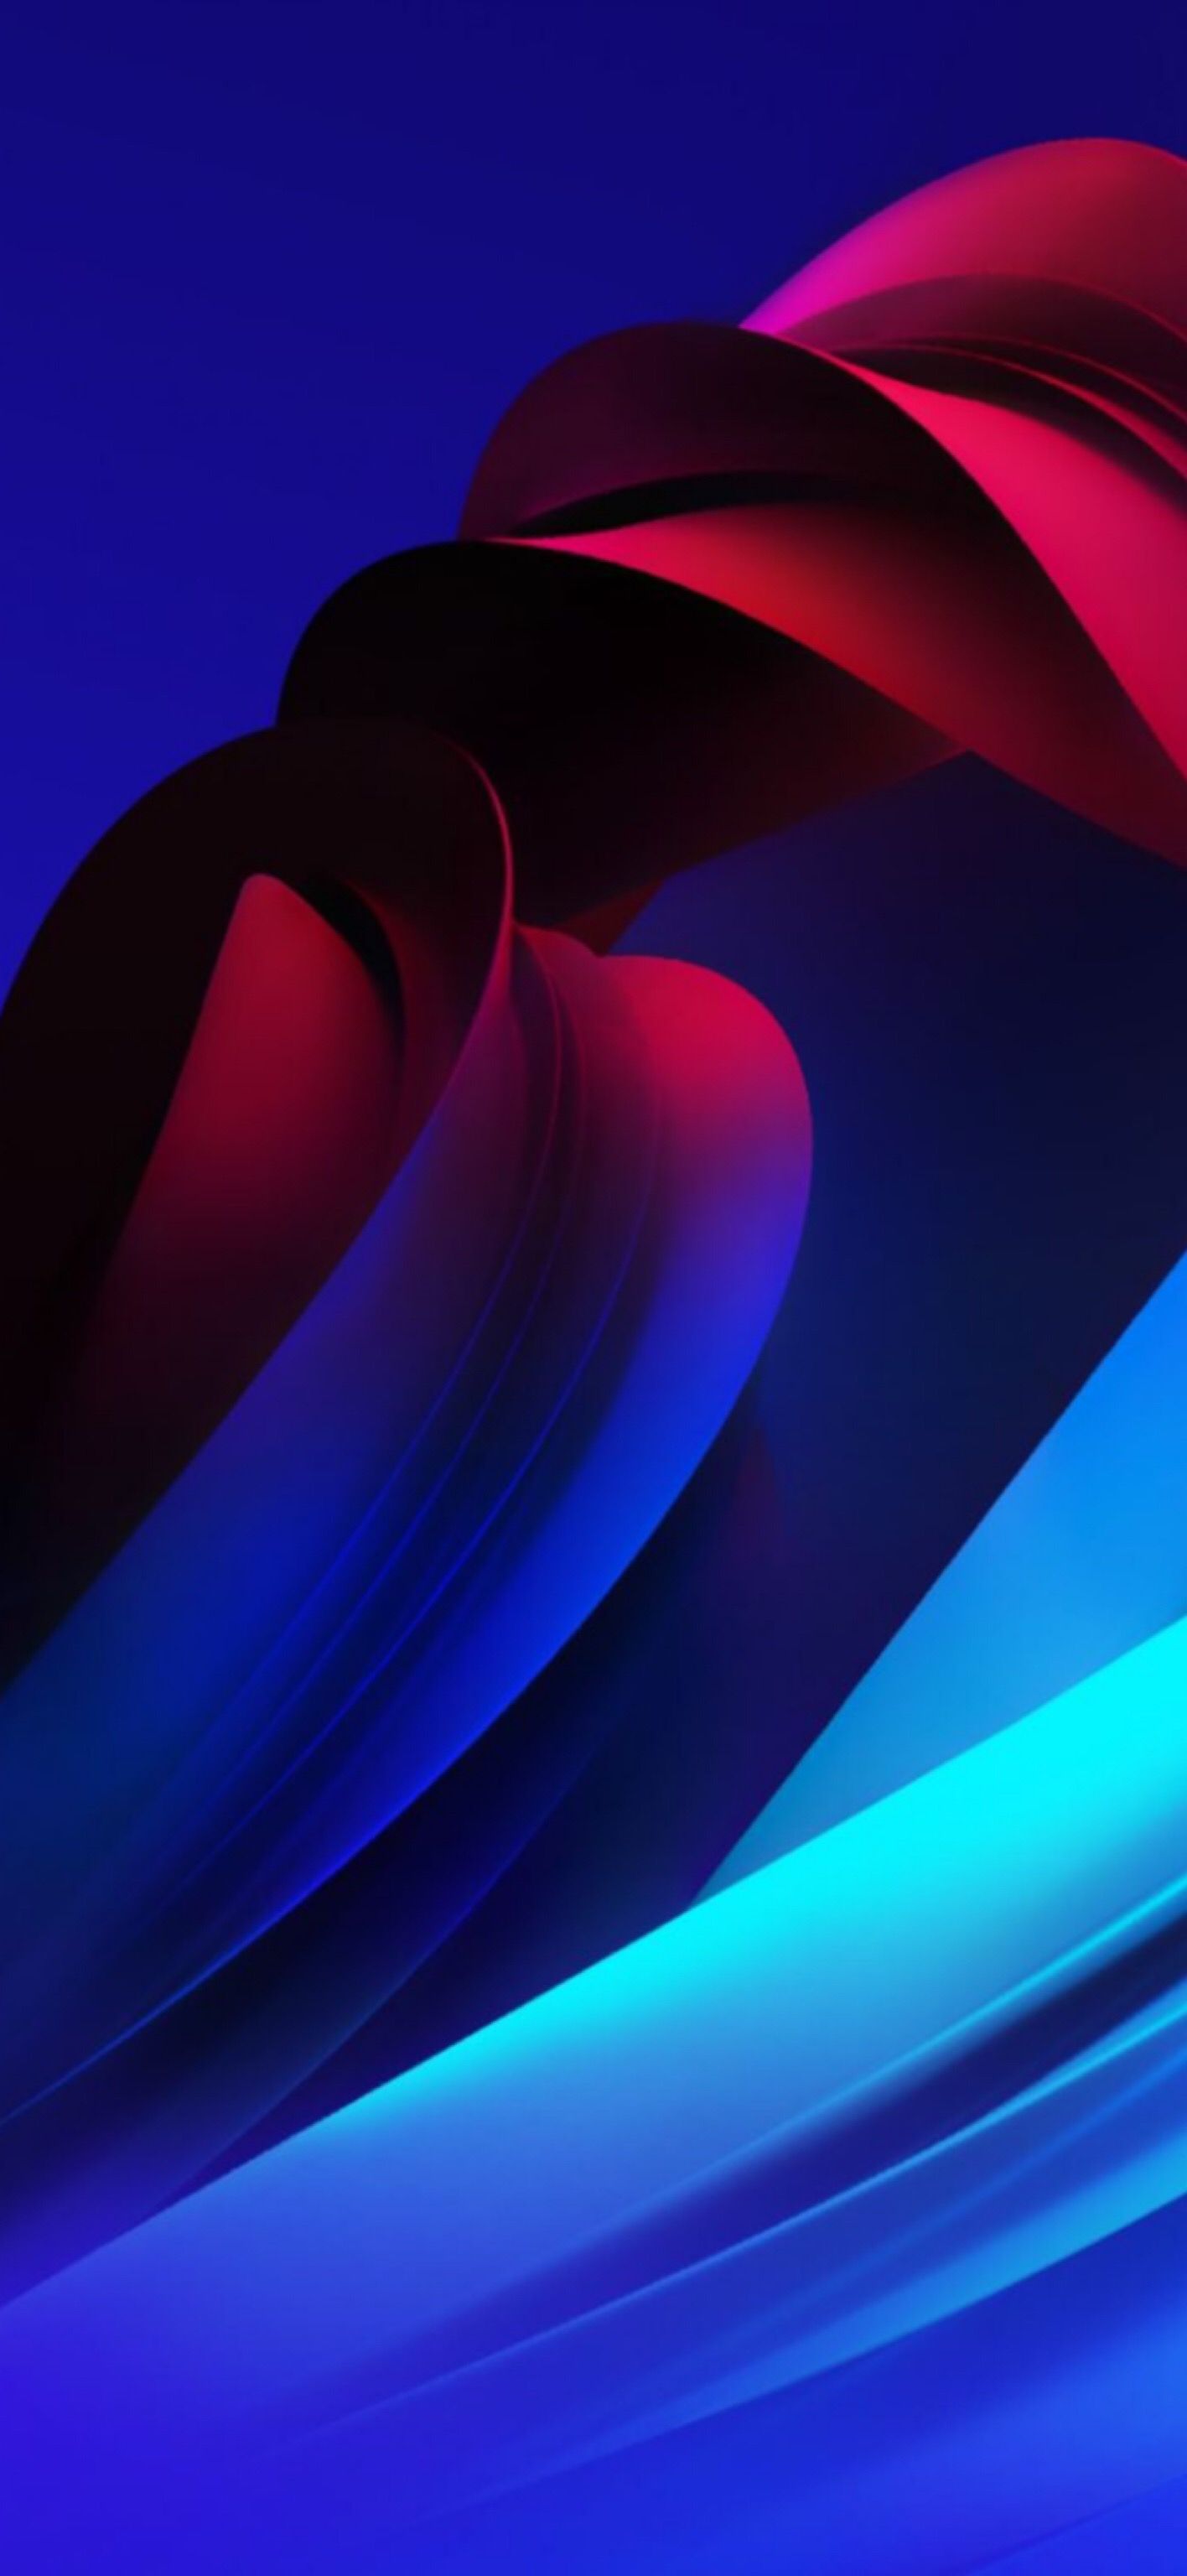 Wallpaper Abstract Resized For iPhone X Best